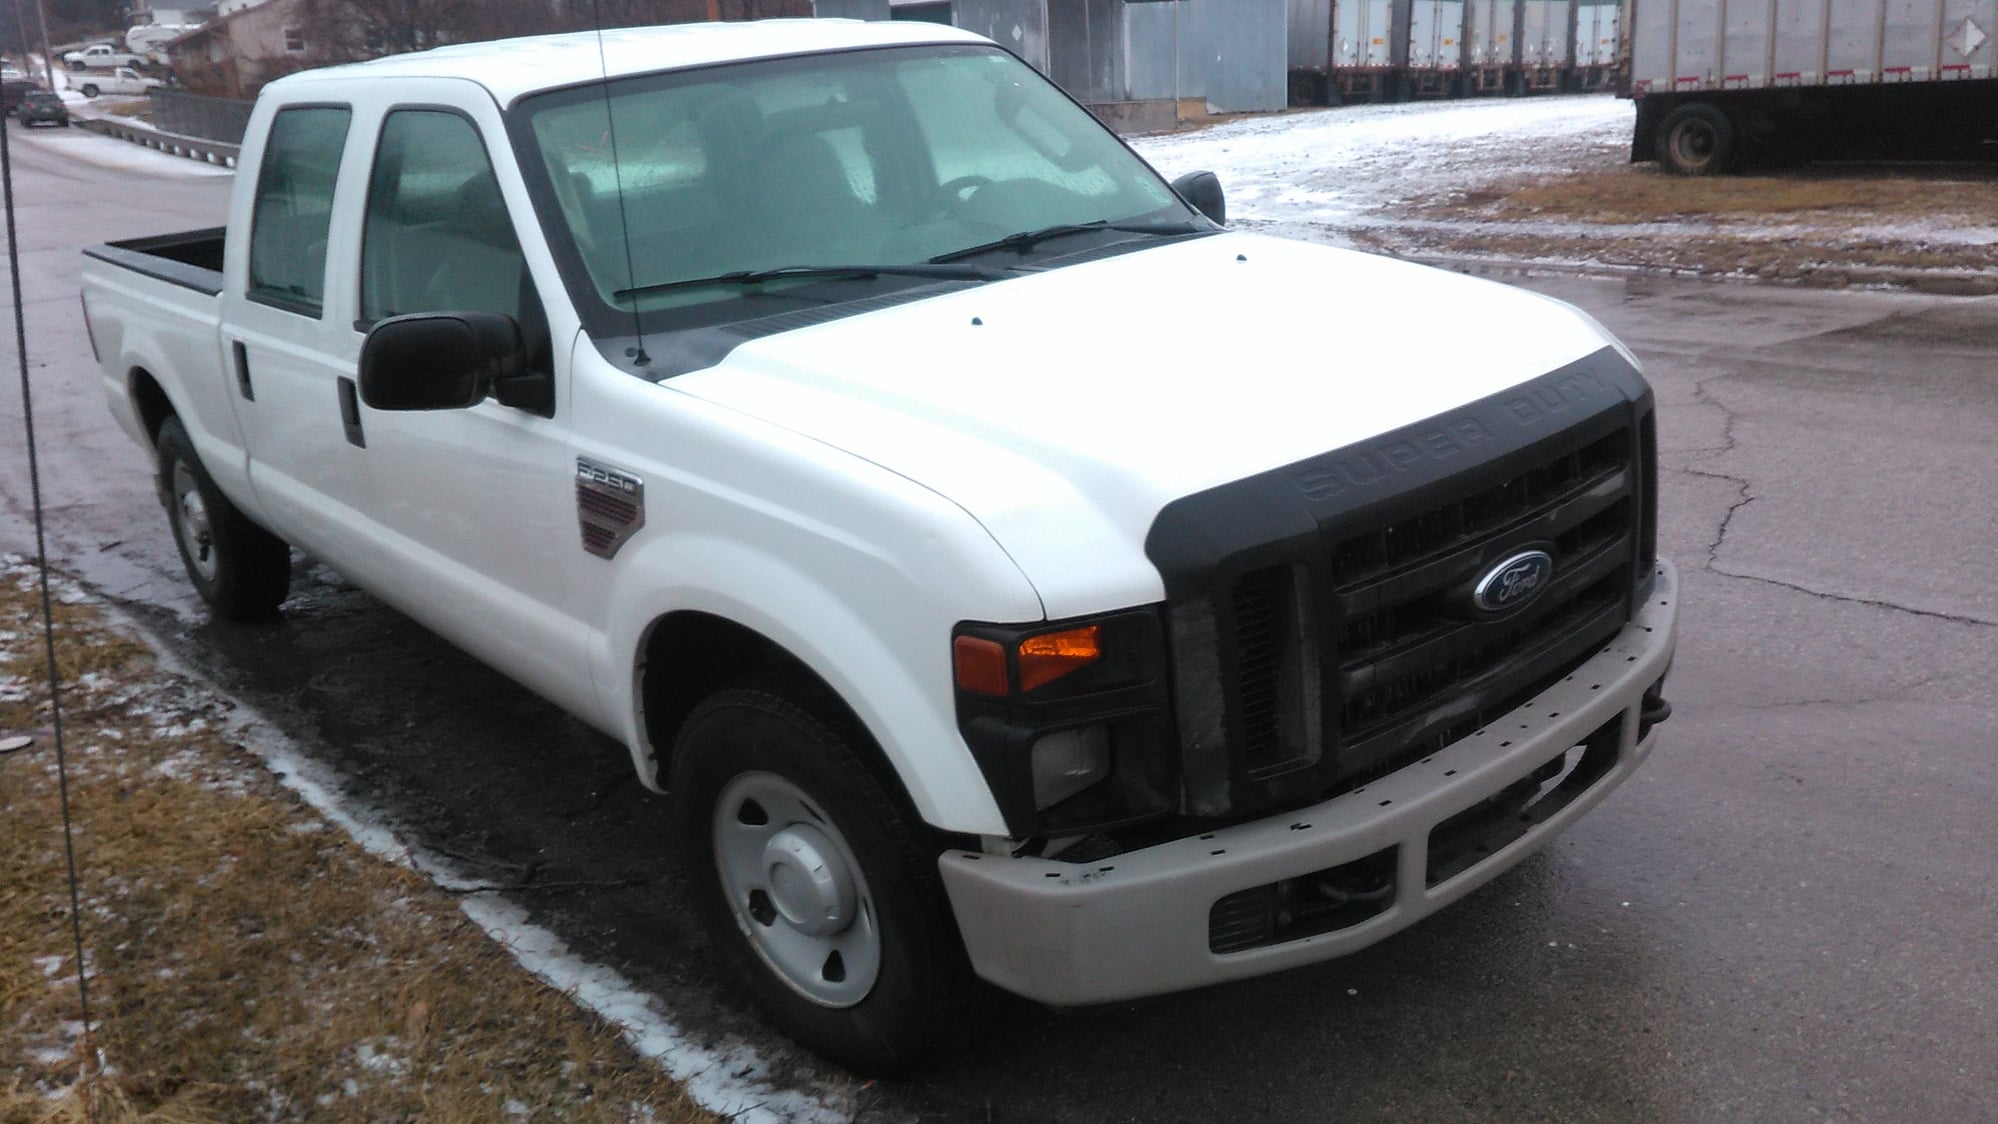 2014 Ford F-250 Super Duty - Parting a 2008 F250 Superduty 2 wheel drive shortbed truck. - Leavenworth, KS 66048, United States